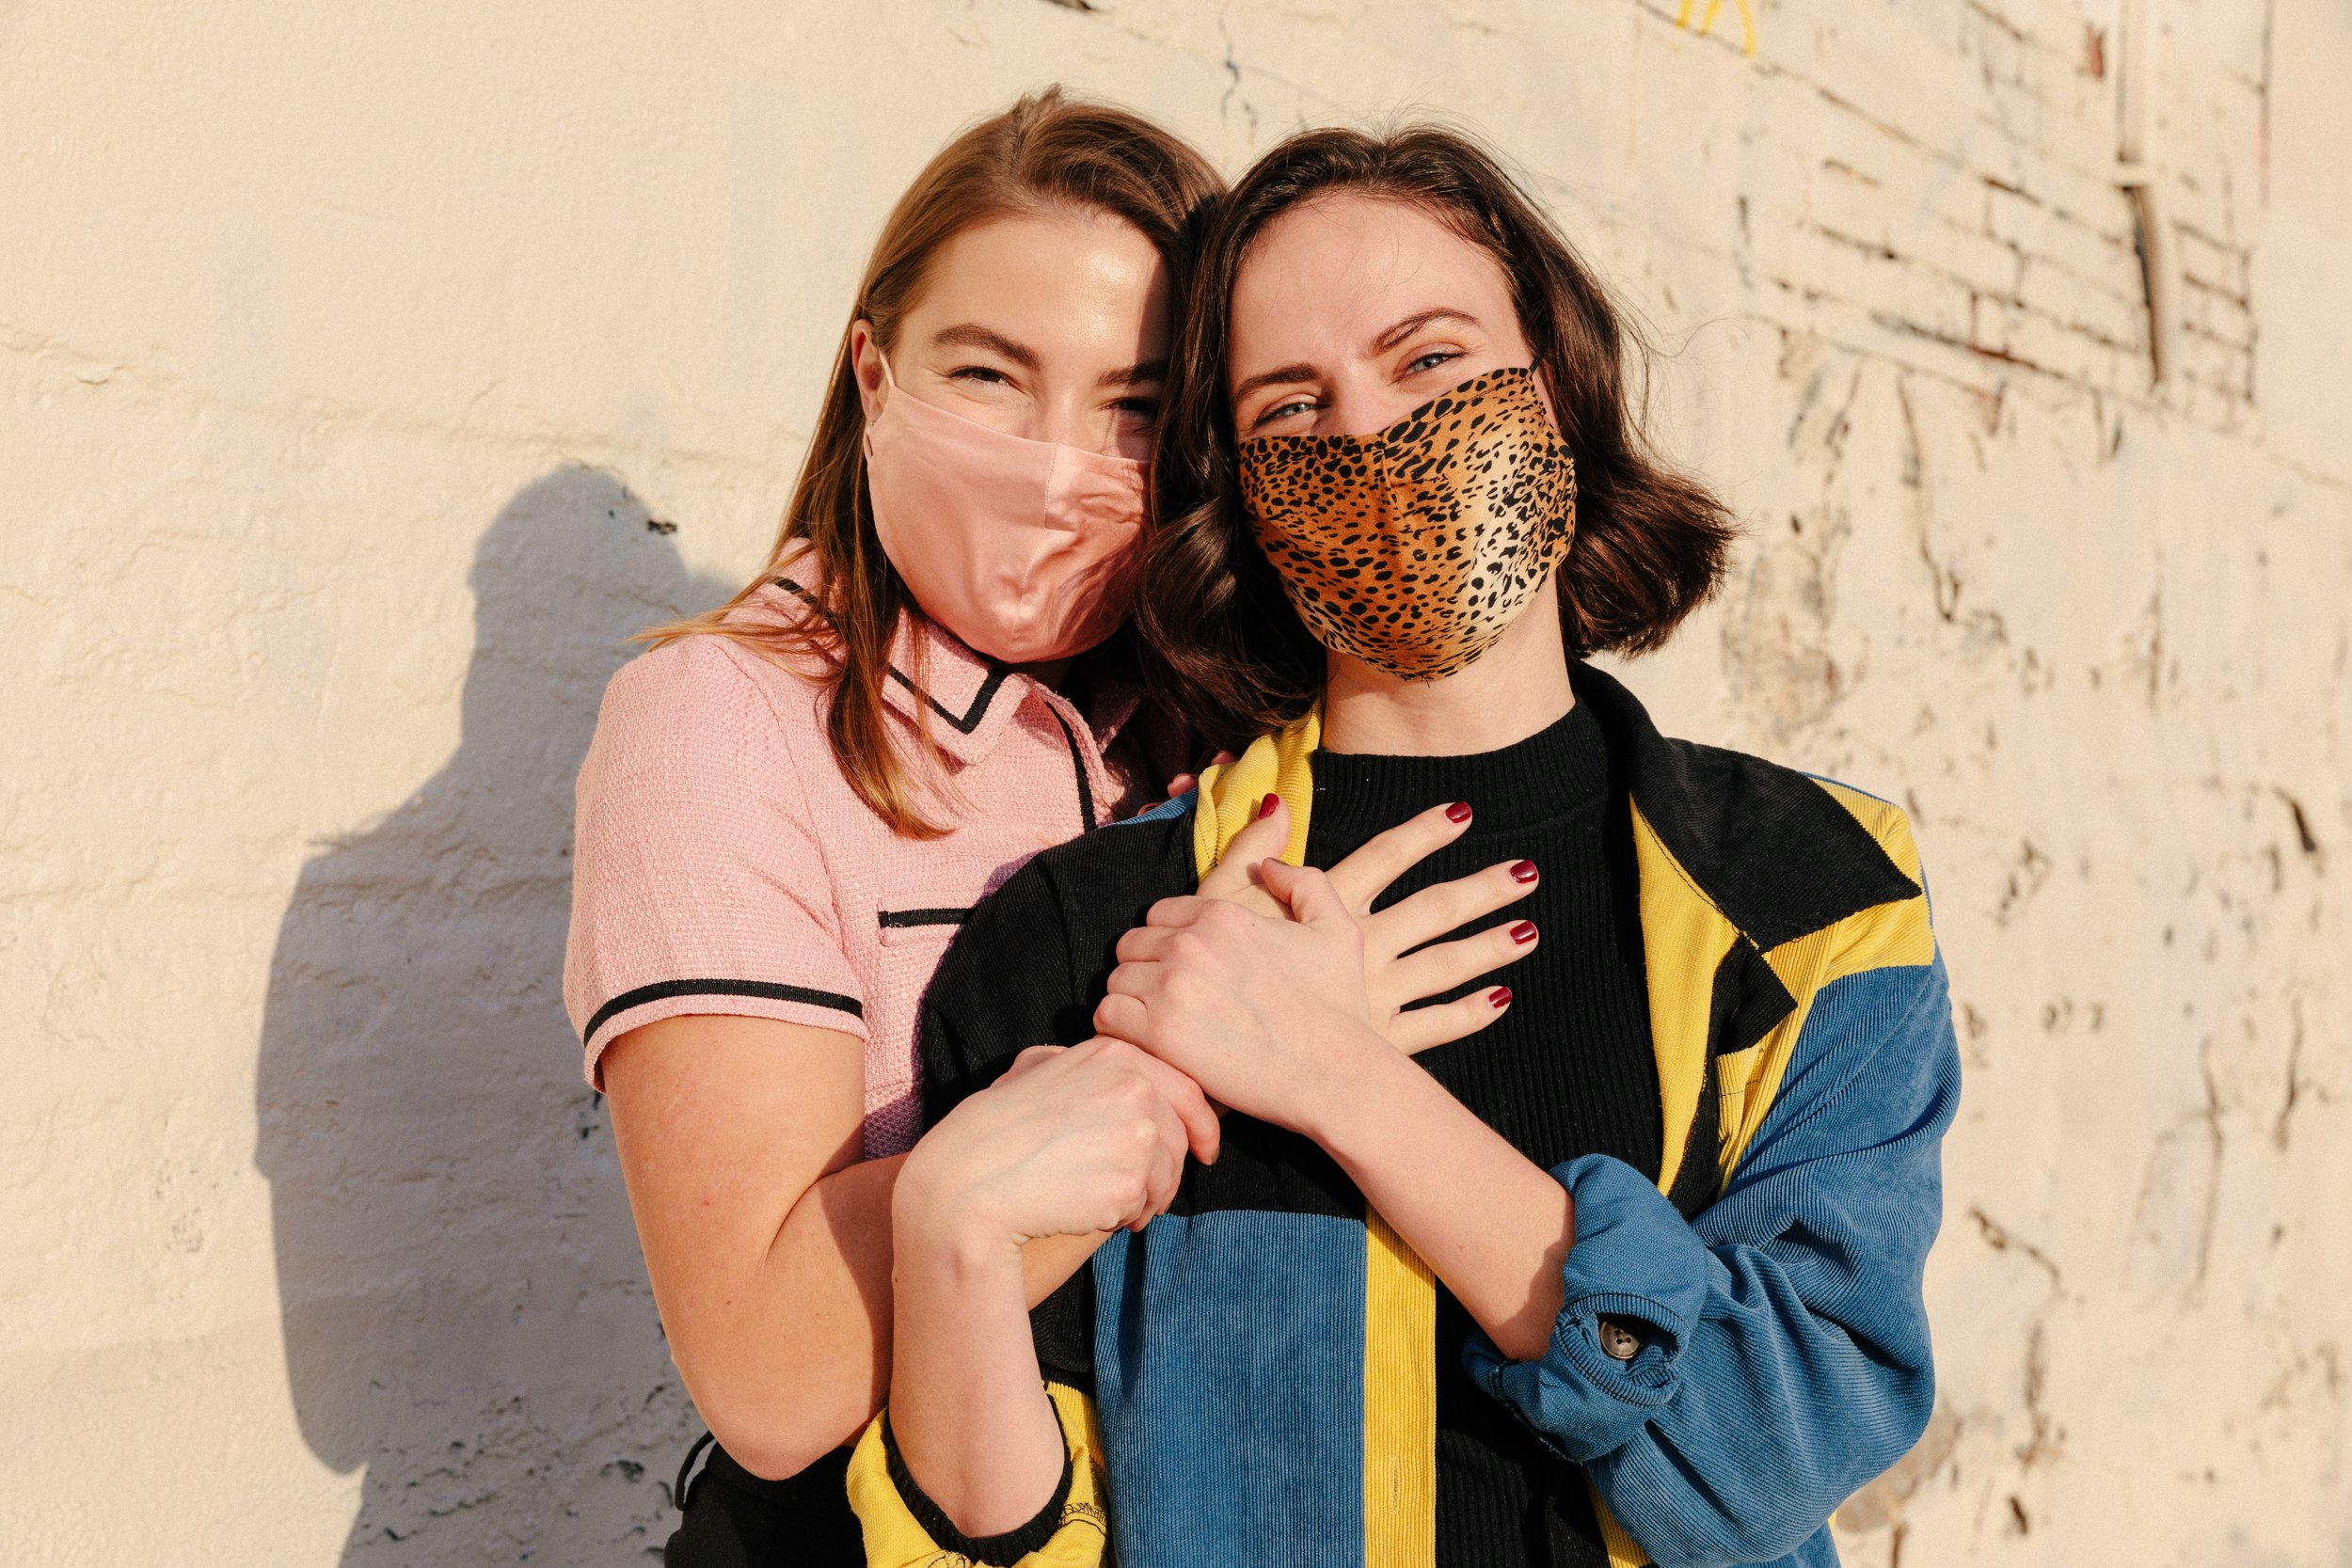  A pair of female-presenting people posing for the camera against a cream colored wall wearing face masks. The person on the left has reddish orange hair, is wearing a pink button up shirt, and is holding the person on the right. The person on the ri